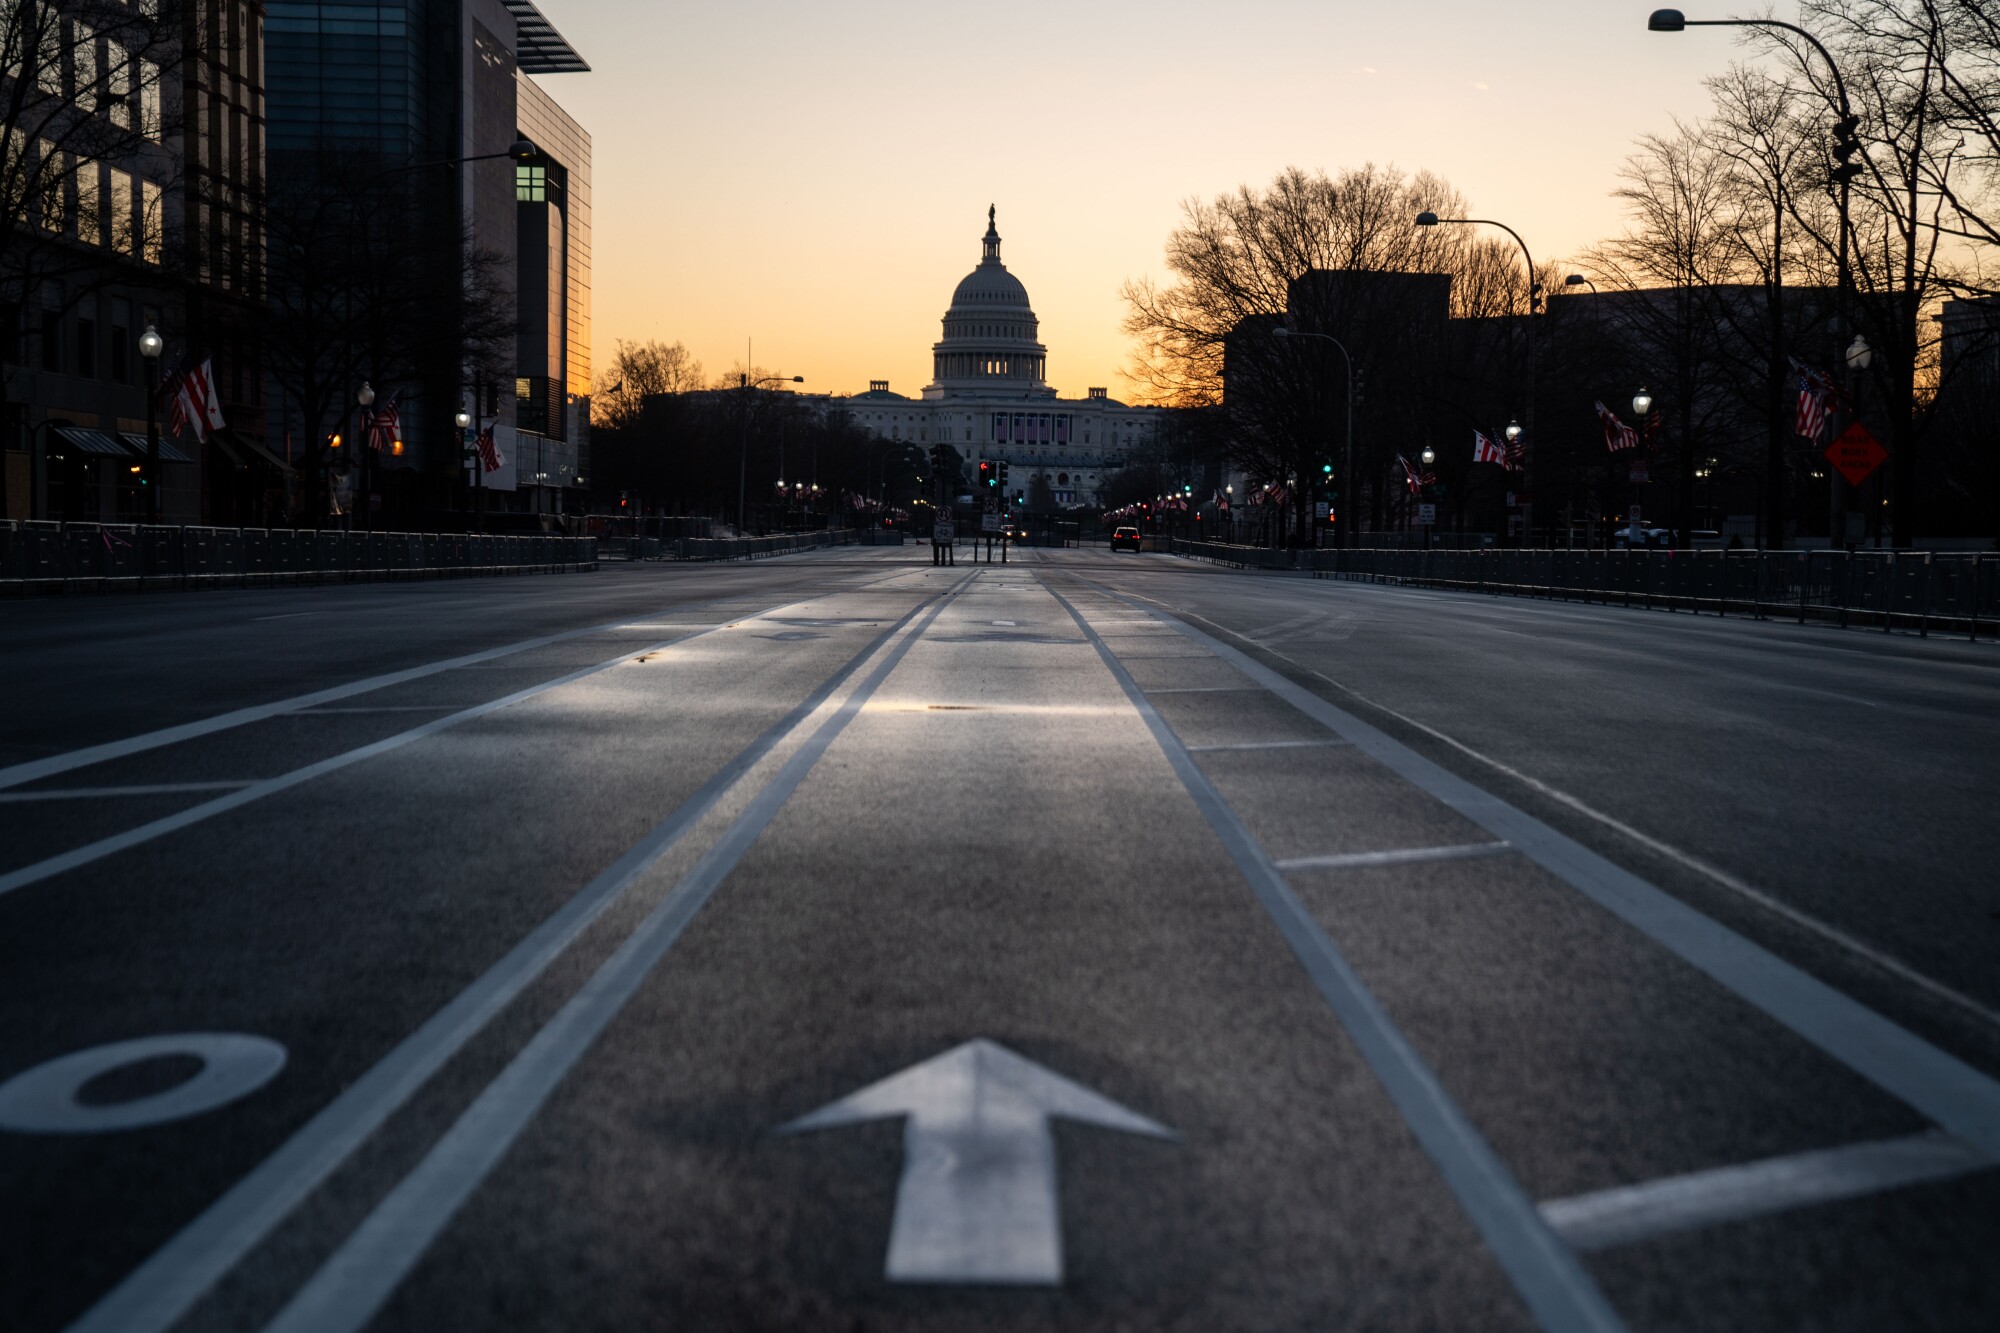 The sun rises behind the U.S. Capitol on Saturday, as seen from Pennsylvania Avenue